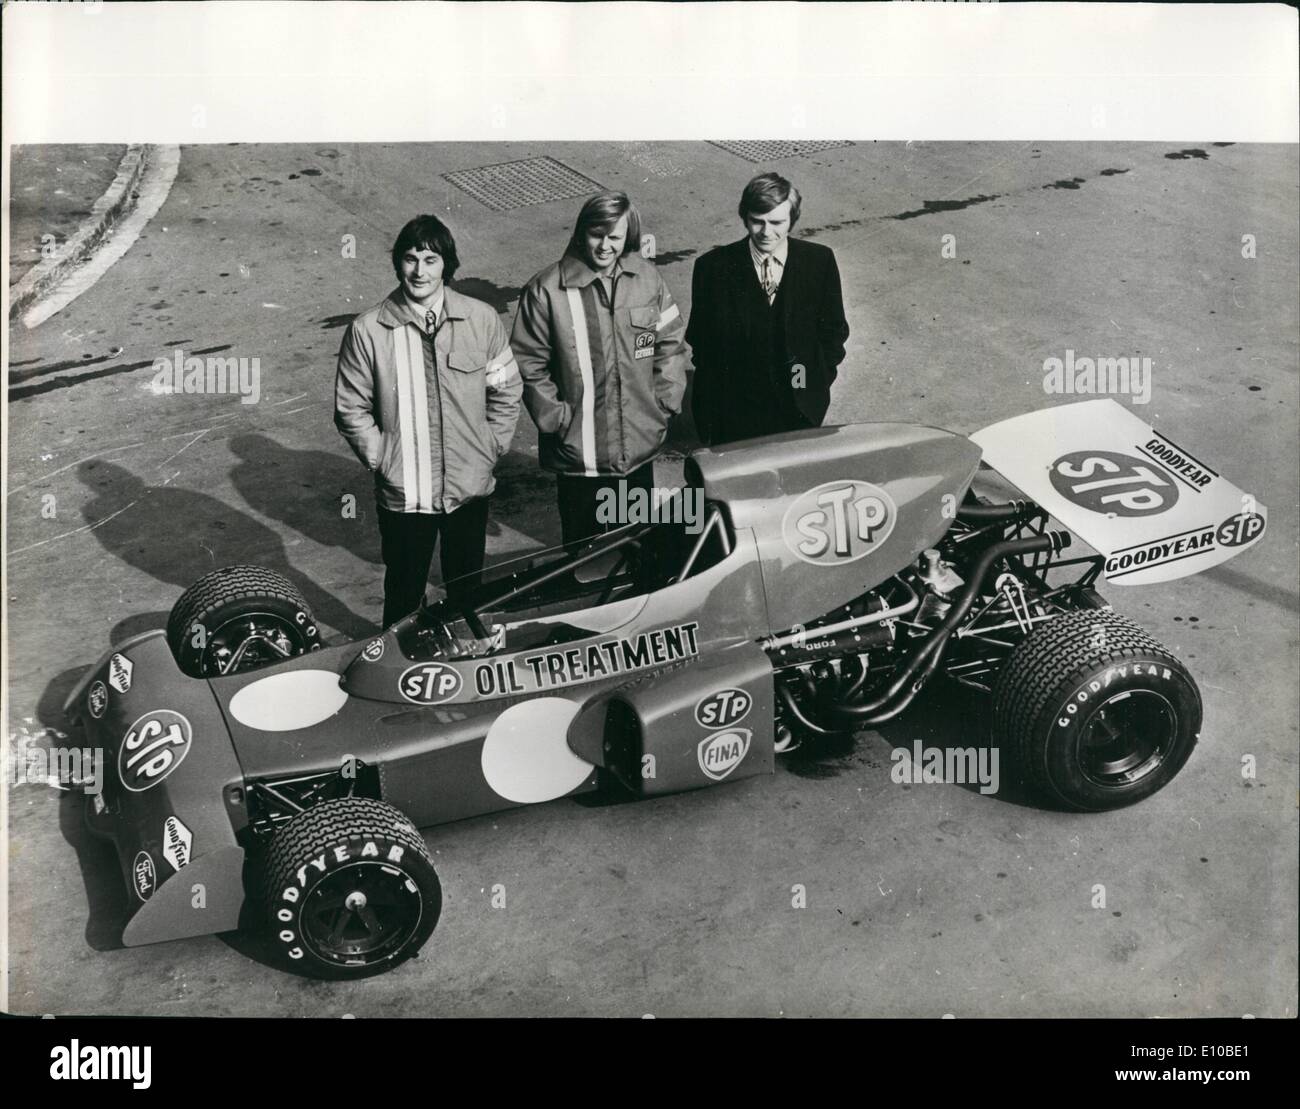 Mar. 03, 1972 - The New British Designed Racing Car March 721X To Make Its Debut At Brands Hatch: A press conference held in the Ford Show rooms in Regent's Street last night the revolutionary new March 721X racing car was unveiled. It is due to make its debut in the Race of Champions when it will be driven by Ronnie Peterson, the  Swedish driver, at Brands Hatch on March 19th, The  March 721X features a number of revolutionary ideas including a safety cockpit. Photo shows (L. to R Stock Photo